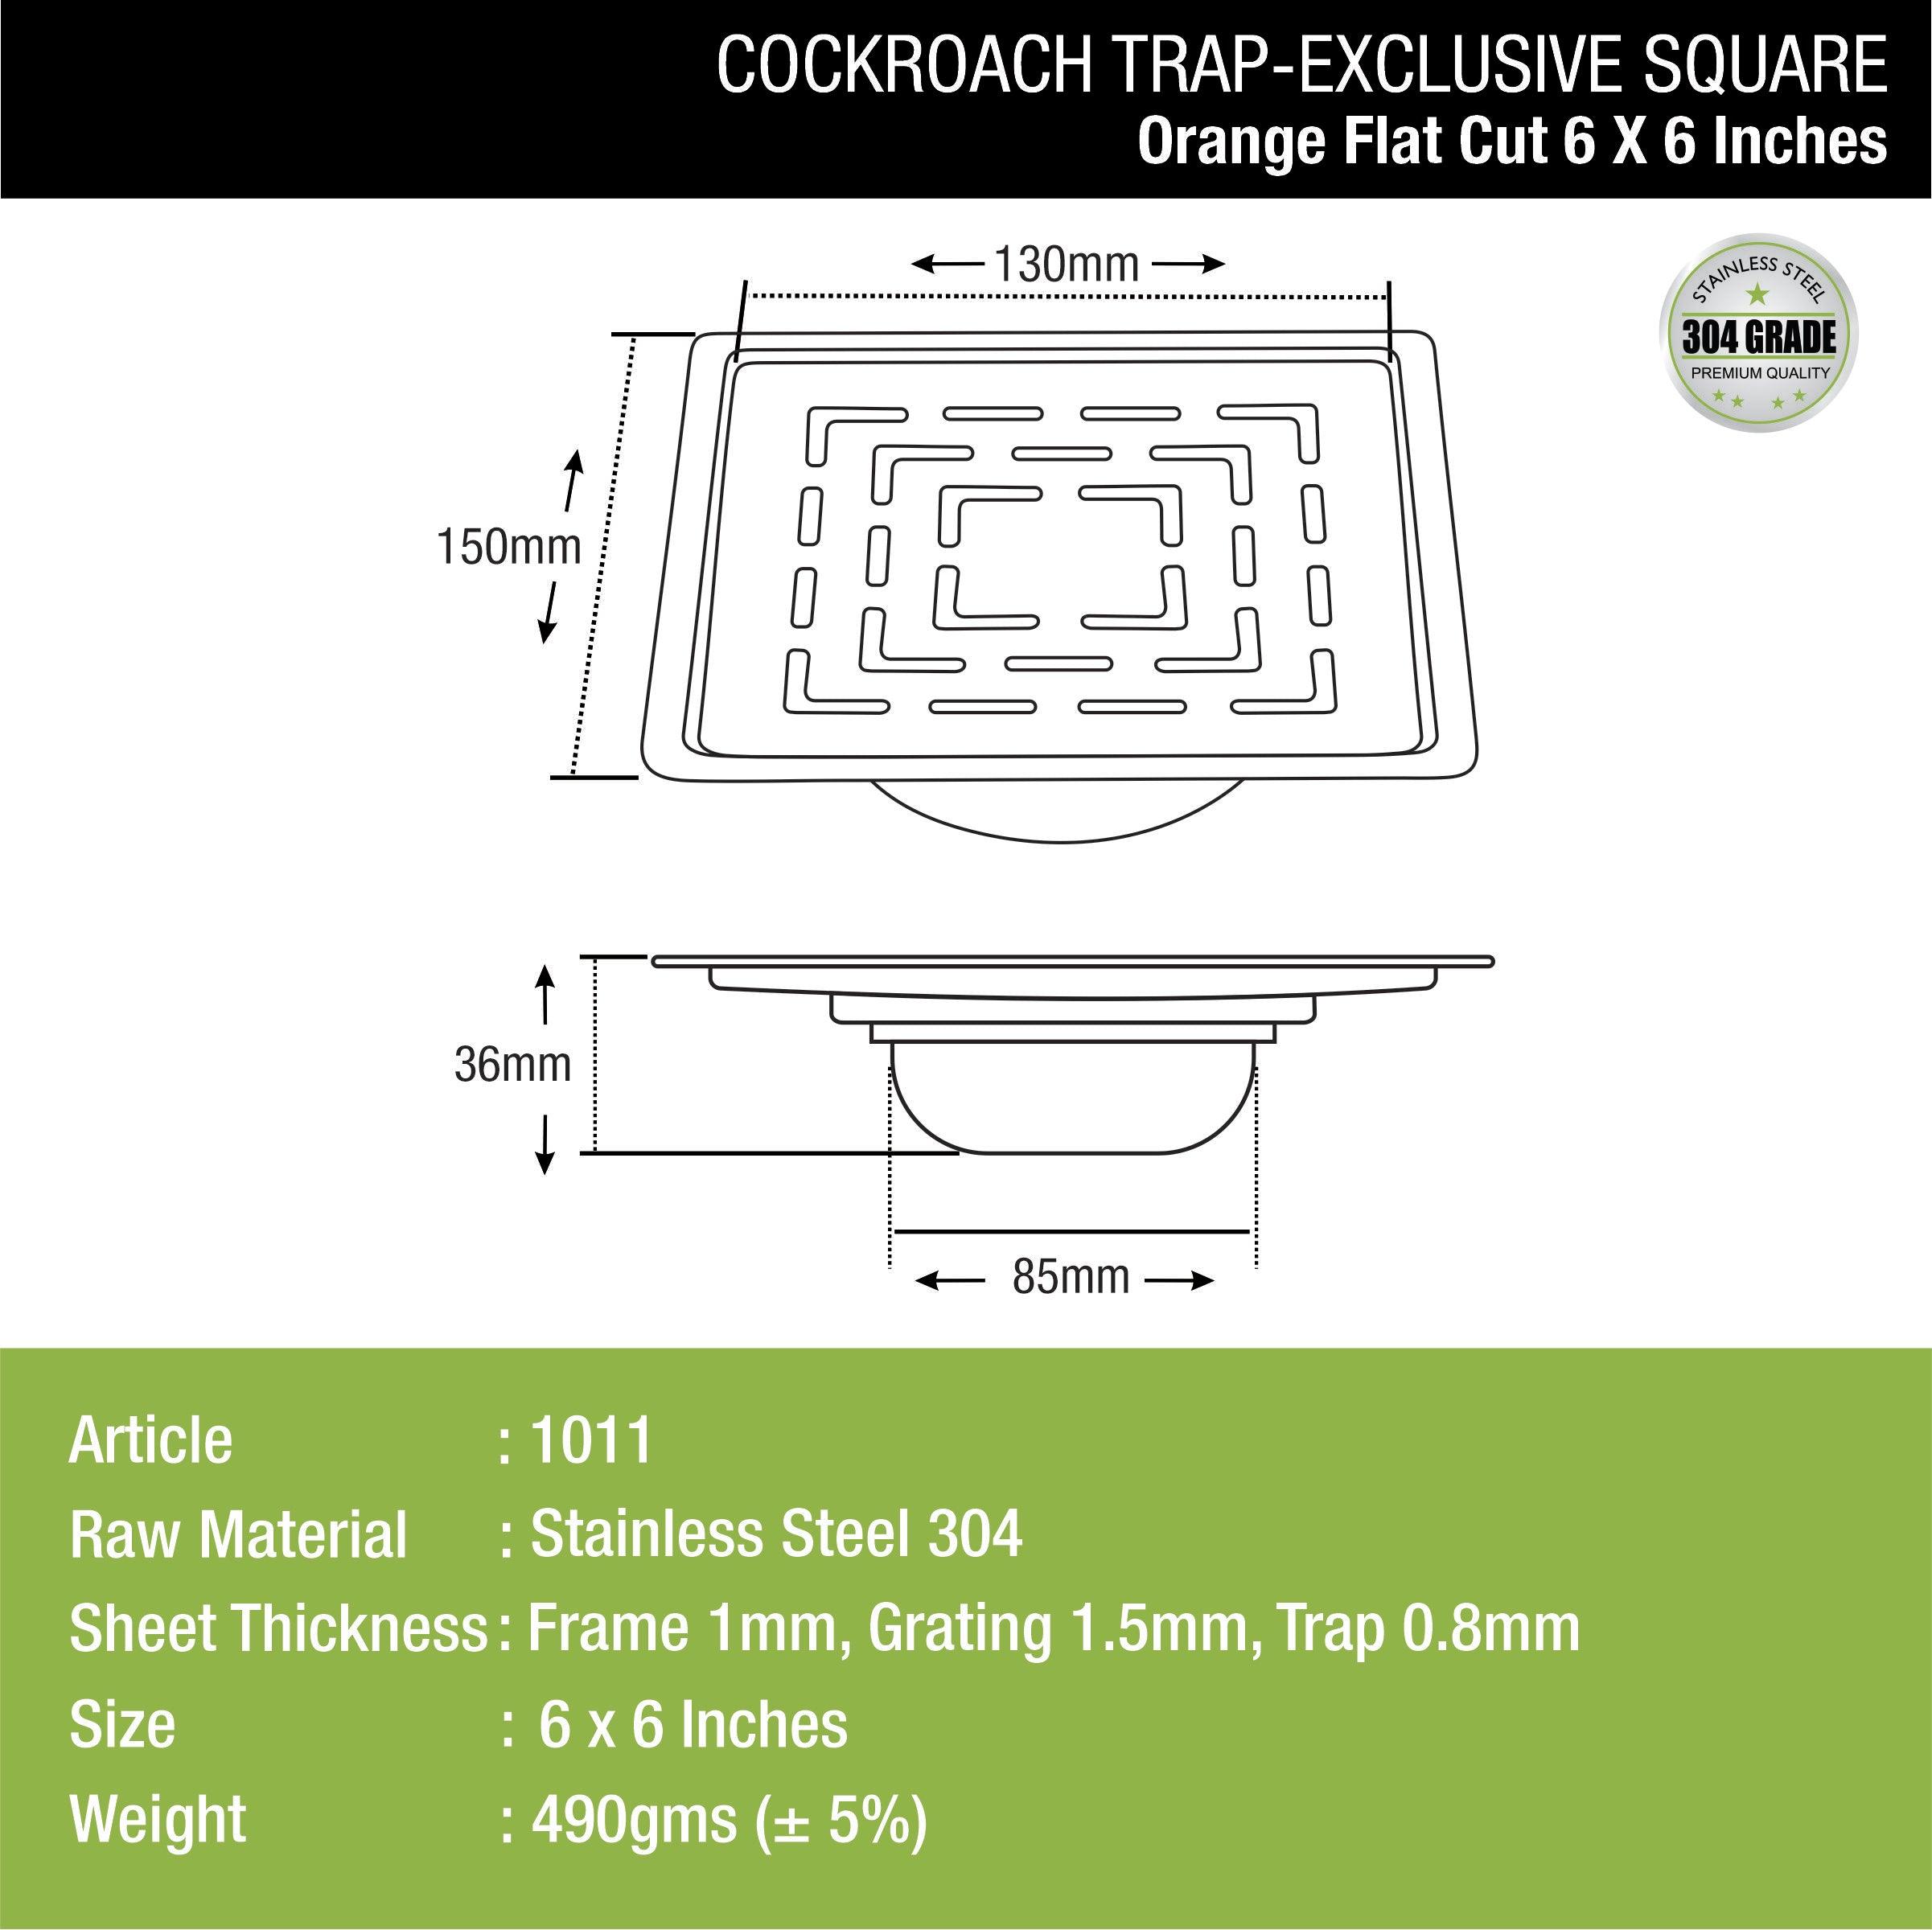 Orange Exclusive Square Flat Cut Floor Drain (6 x 6 Inches) with Cockroach Trap dimensions and sizes